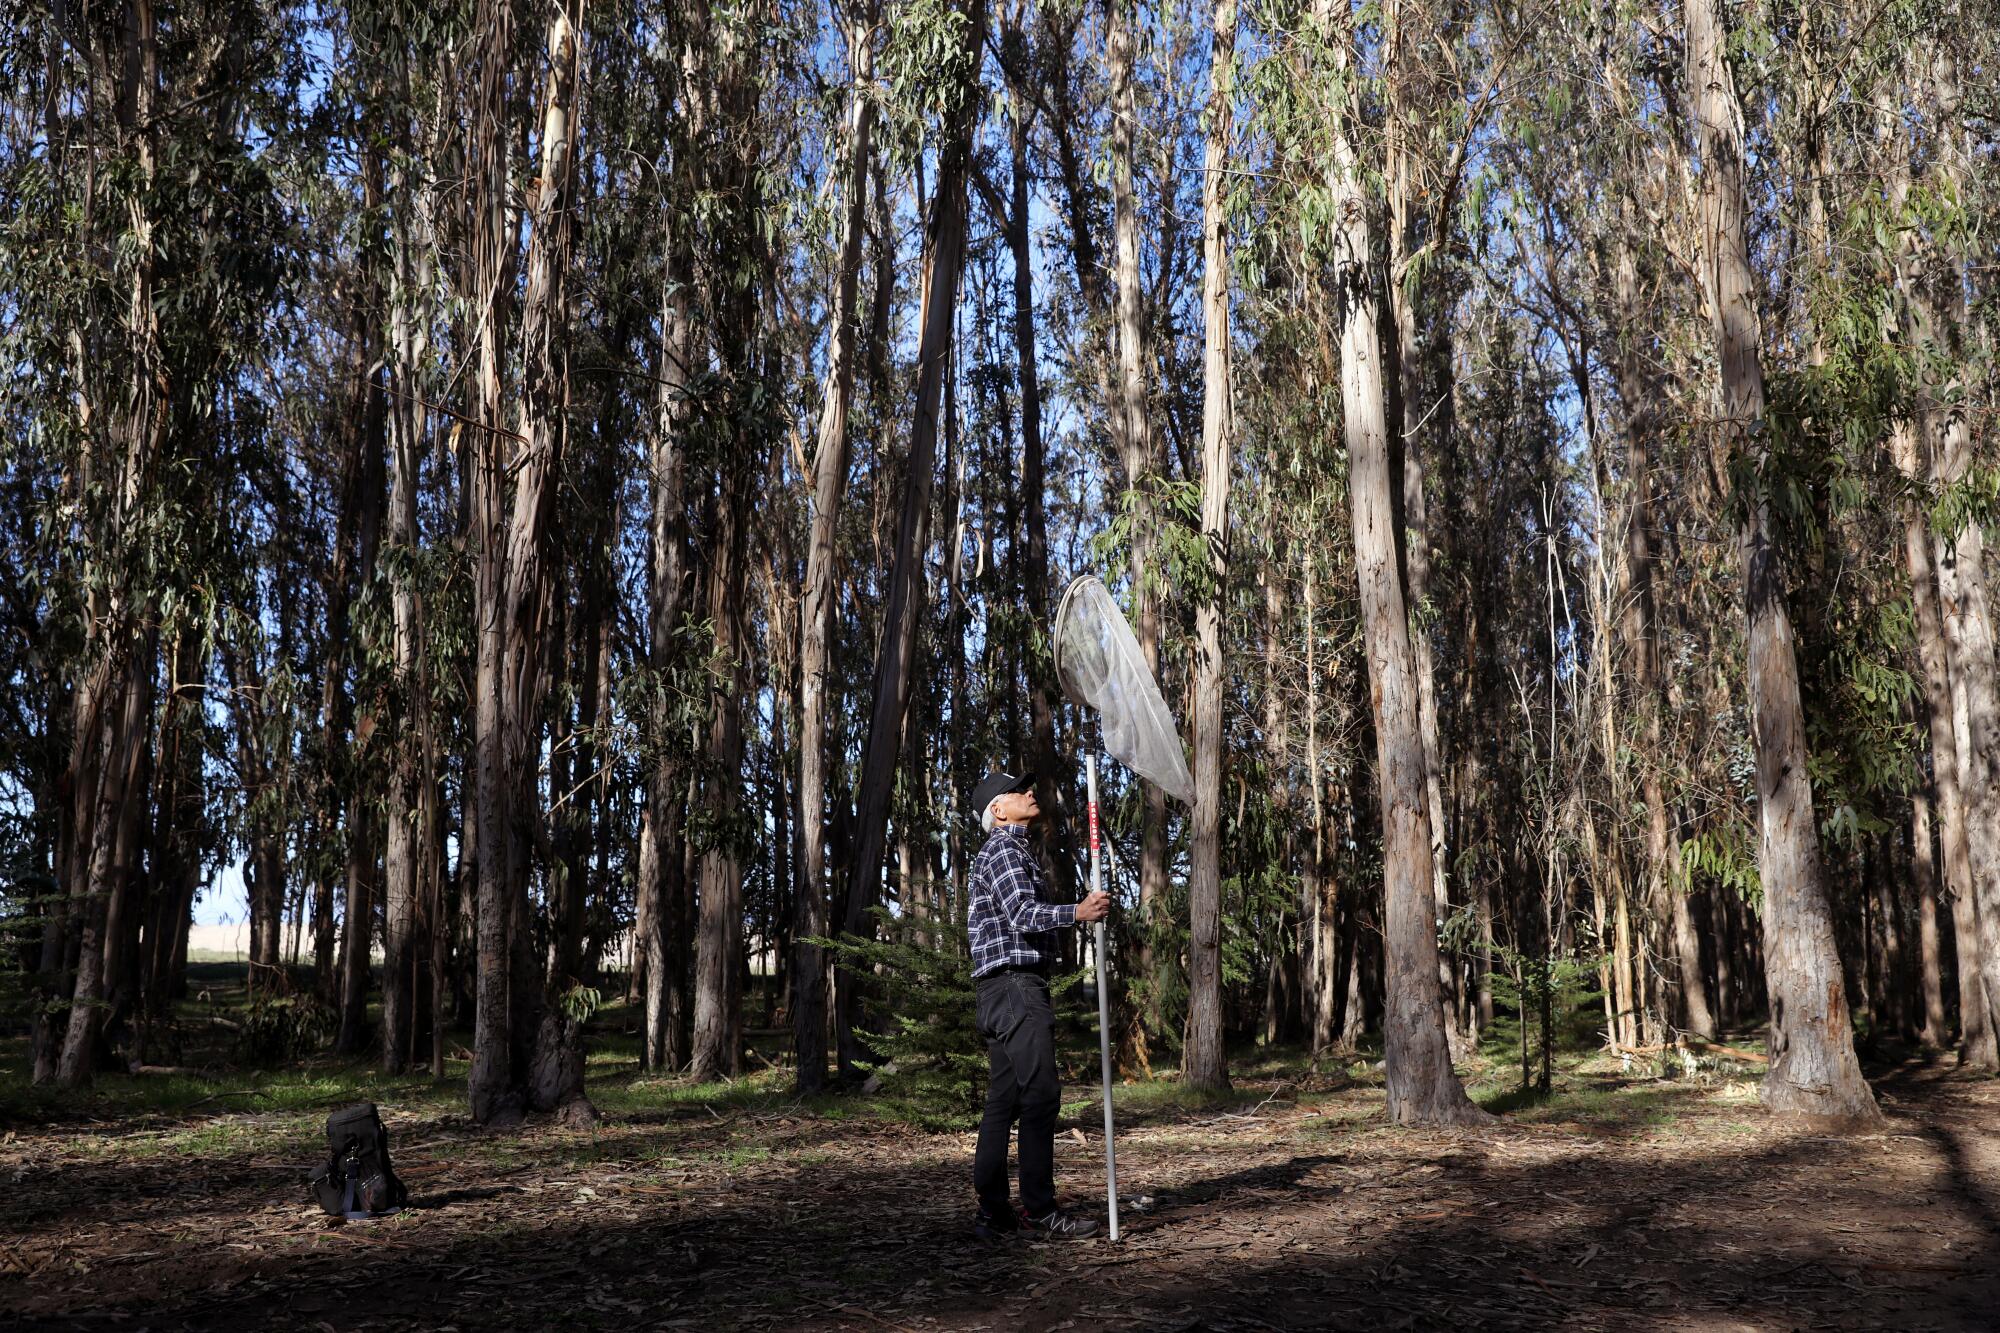 Kingston Leong, 81, looks to capture monarch butterflies to study at the Coastal Access Monarch Butterfly Preserve 